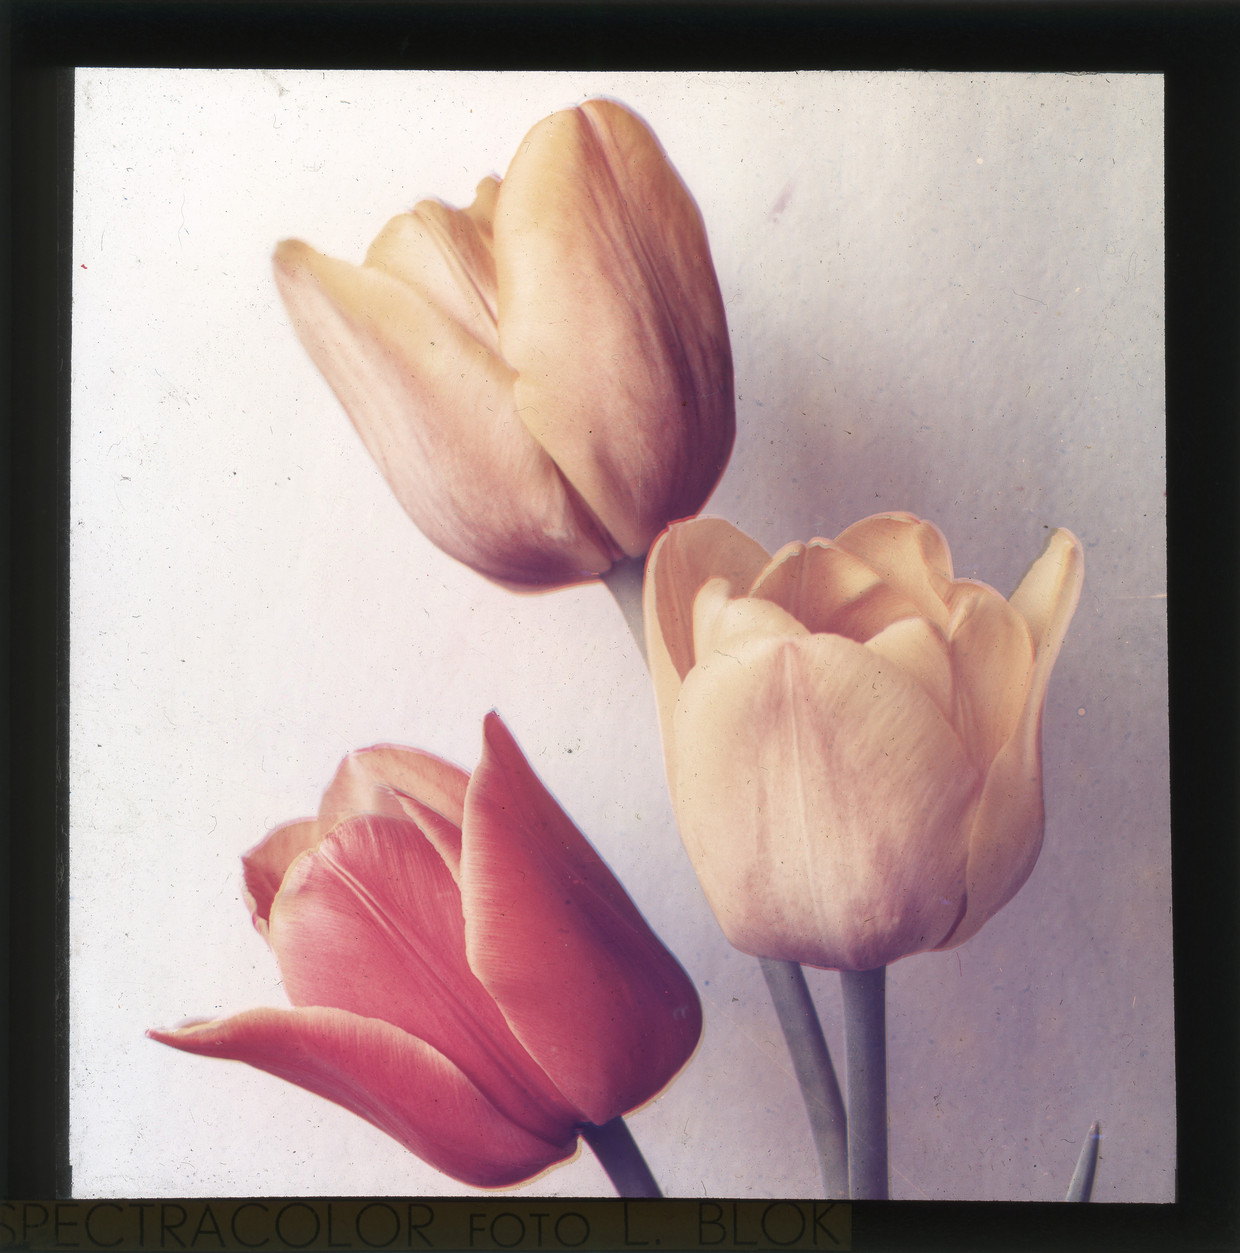 Leendert Blok :: Tulips. Examples of early color photography using the Spectracolor process, circa 1930. | src Het Parool and Galleryviewer